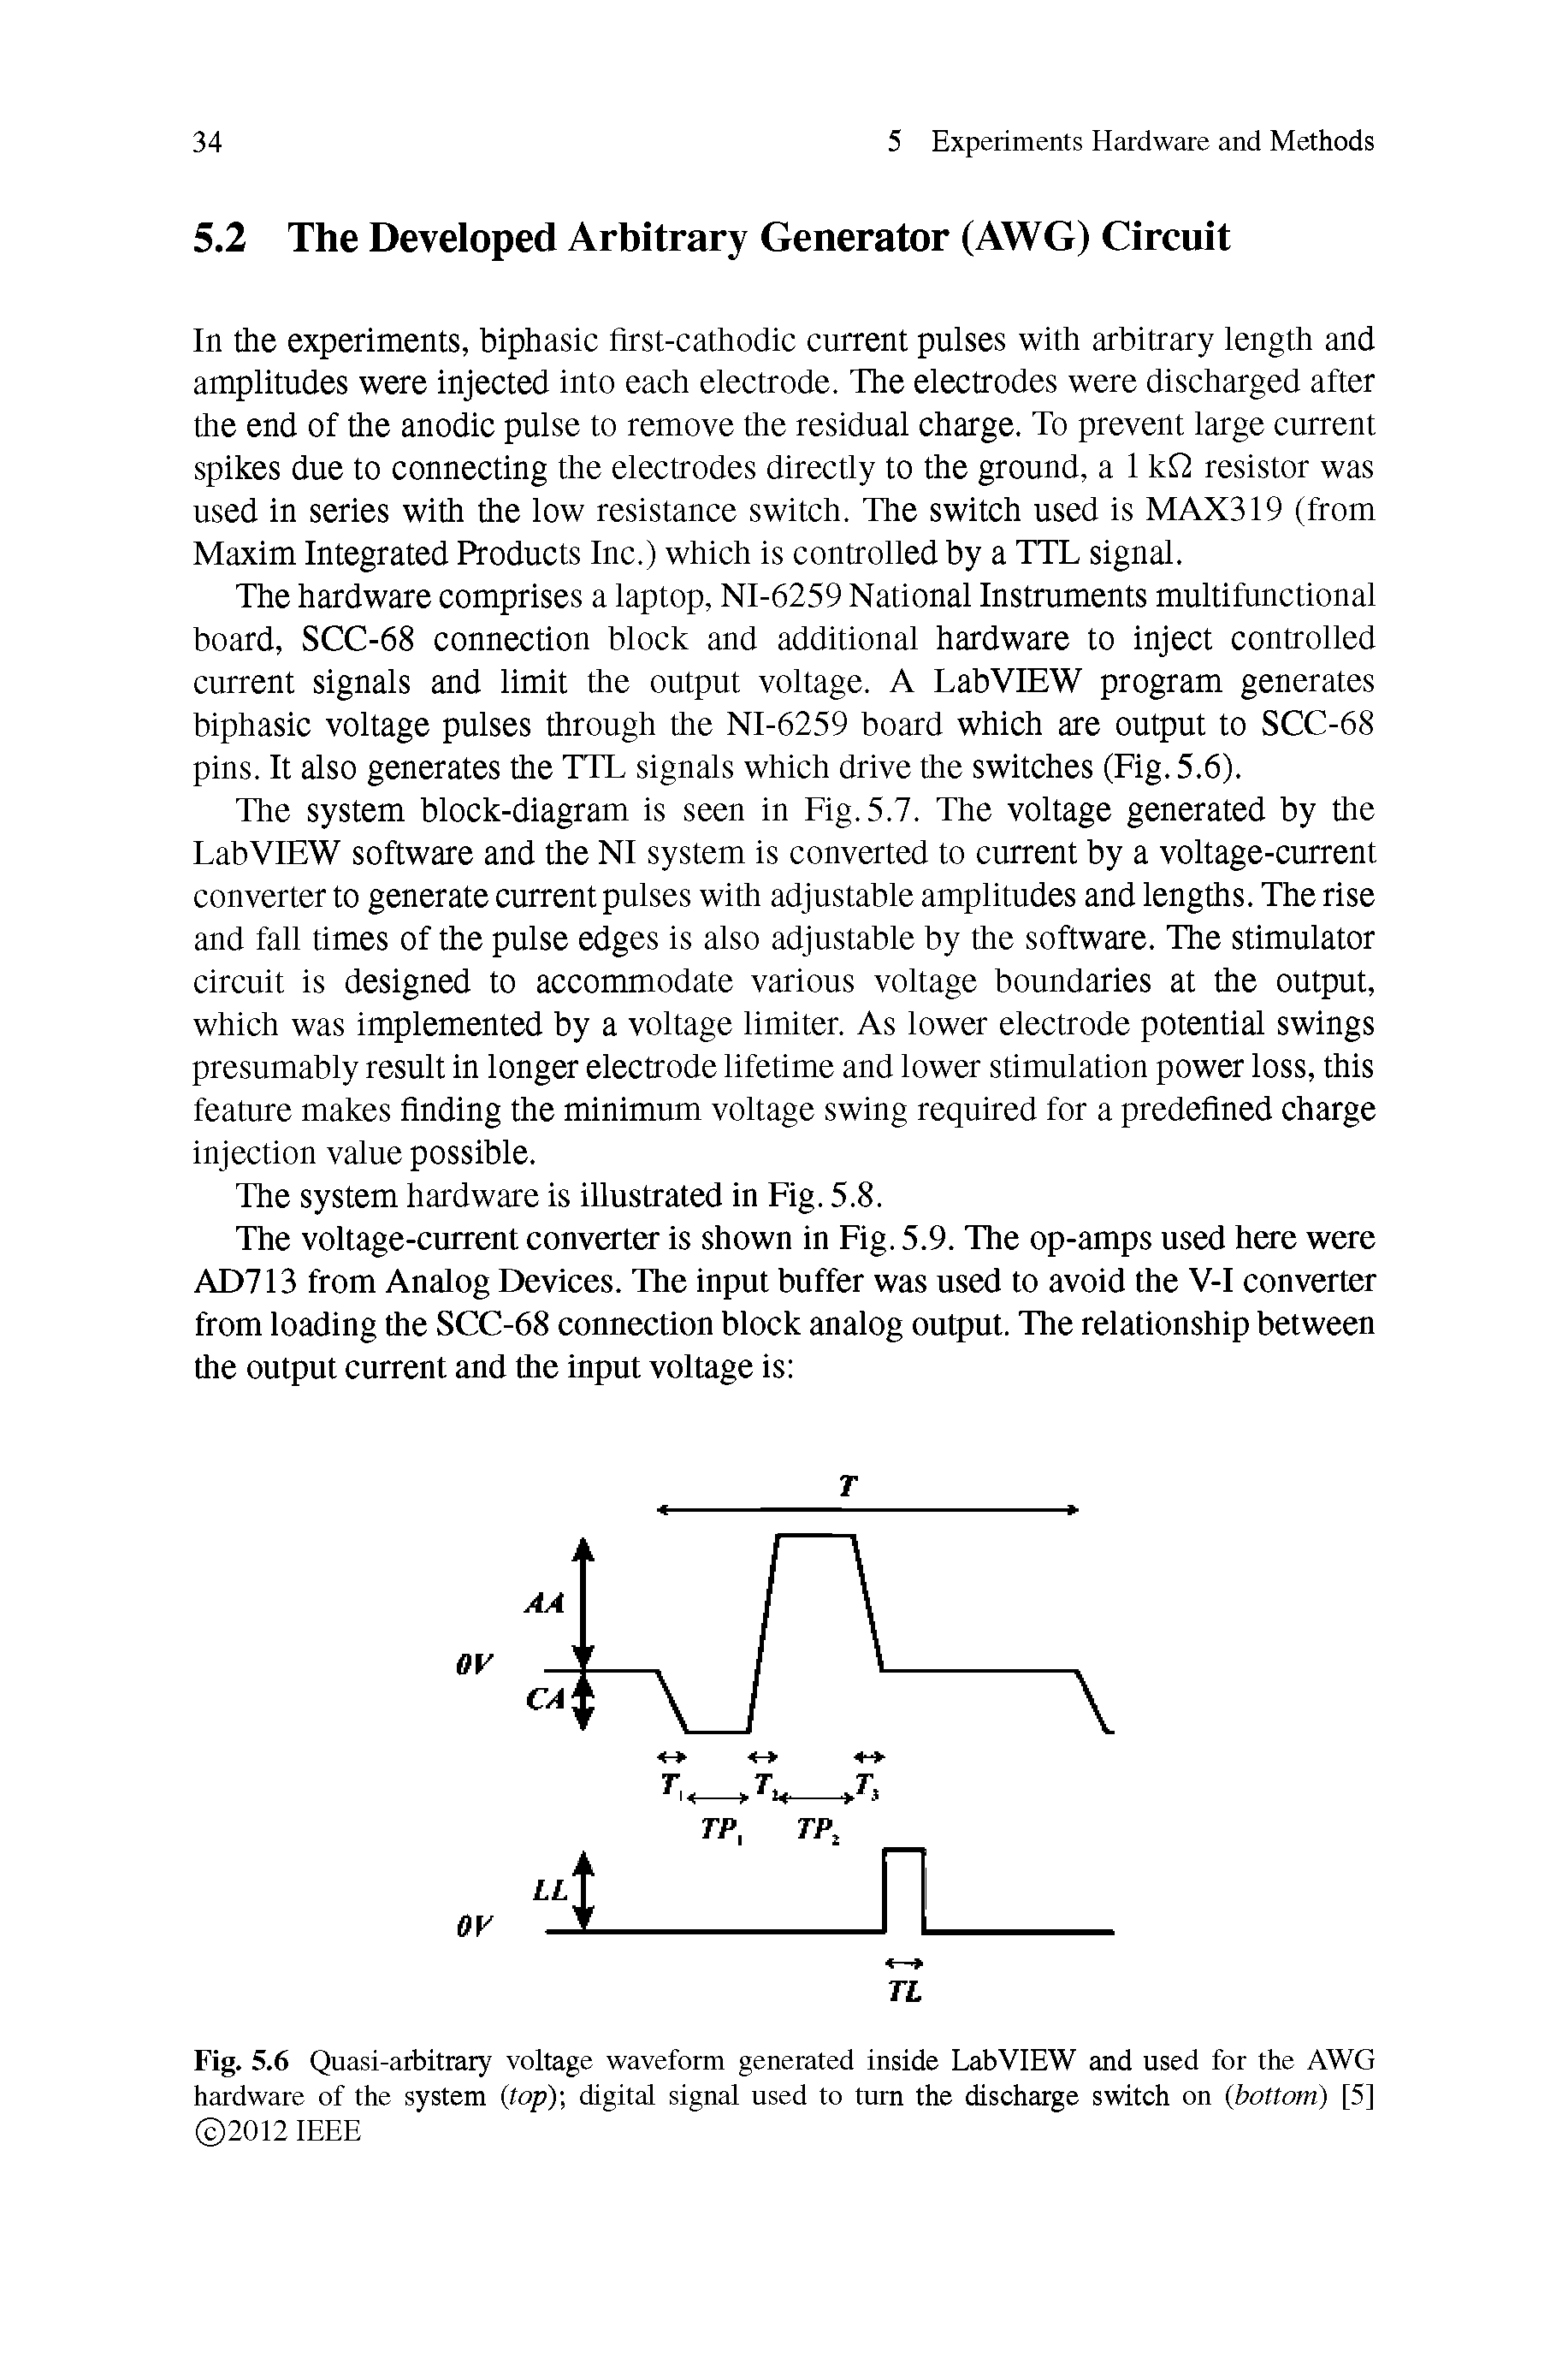 Fig. 5.6 Quasi-arbitrary voltage waveform generated inside LabVIEW and used for the AWG hardware of the system top) digital signal used to turn the discharge switch on bottom) [5] 2012 IEEE...